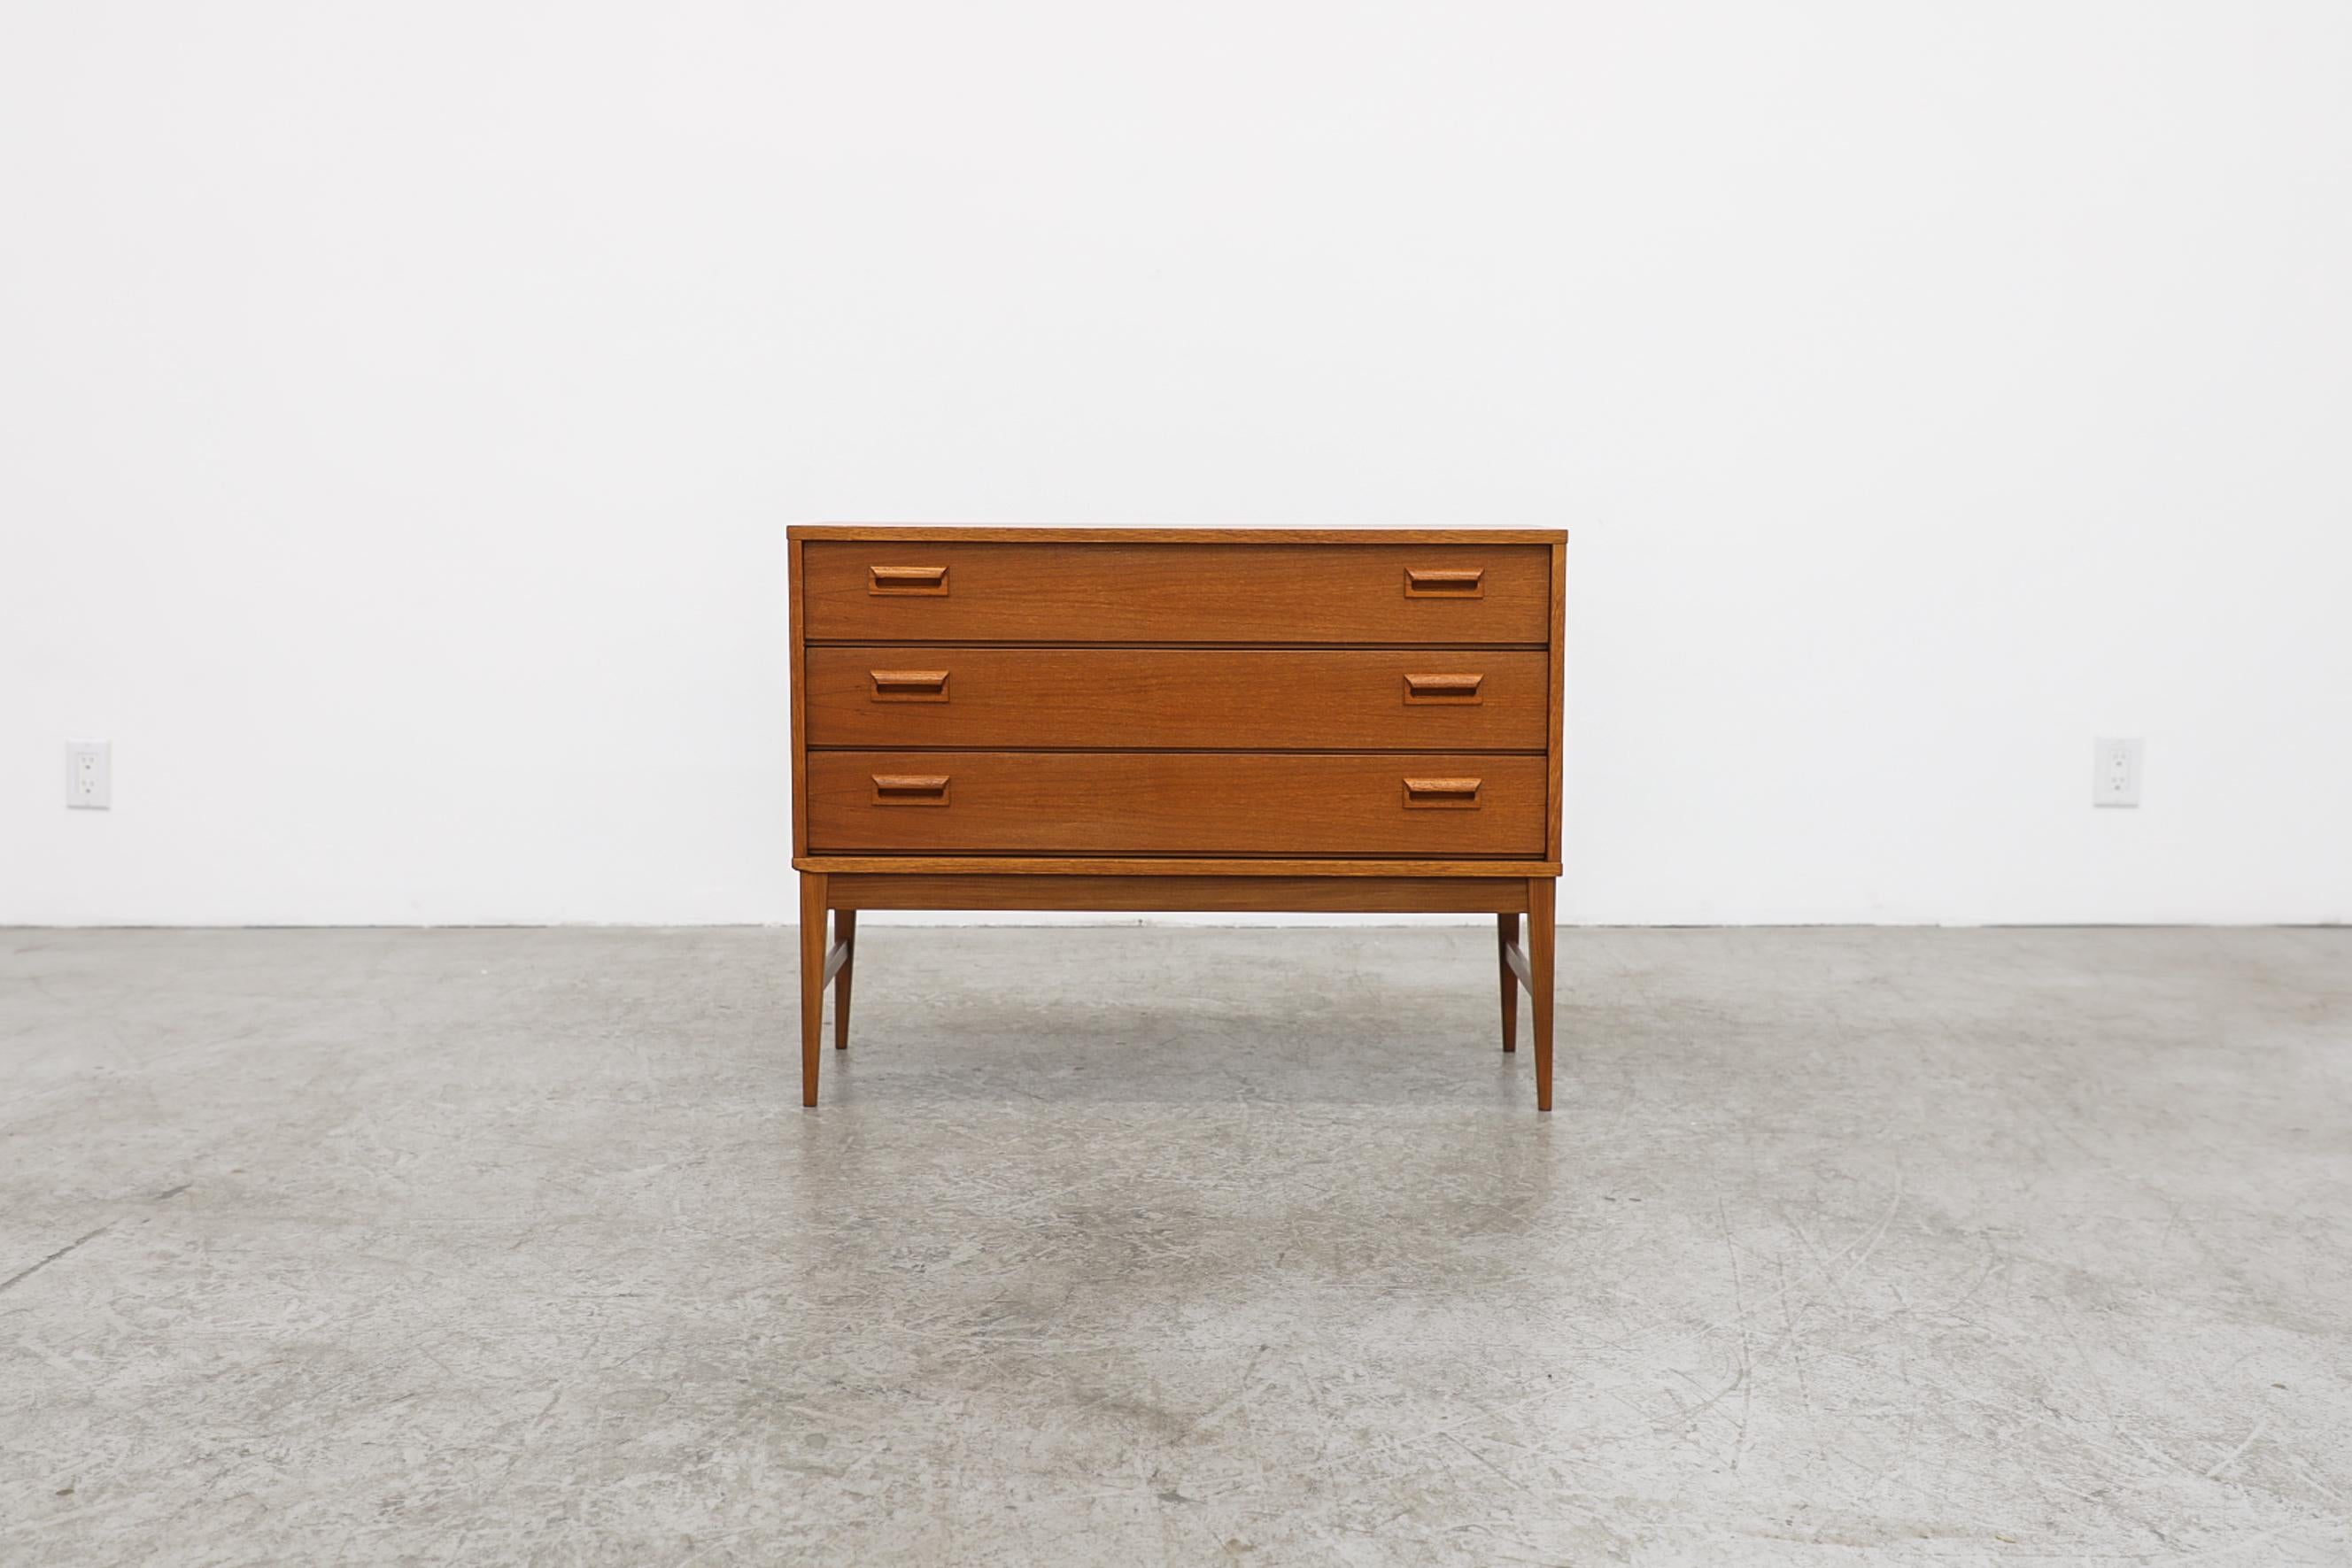 This Mid-Century Danish teak mini dresser or nightstand has 3 drawers with horizontal handles. In original condition with visible wear, consistent with its age and use.